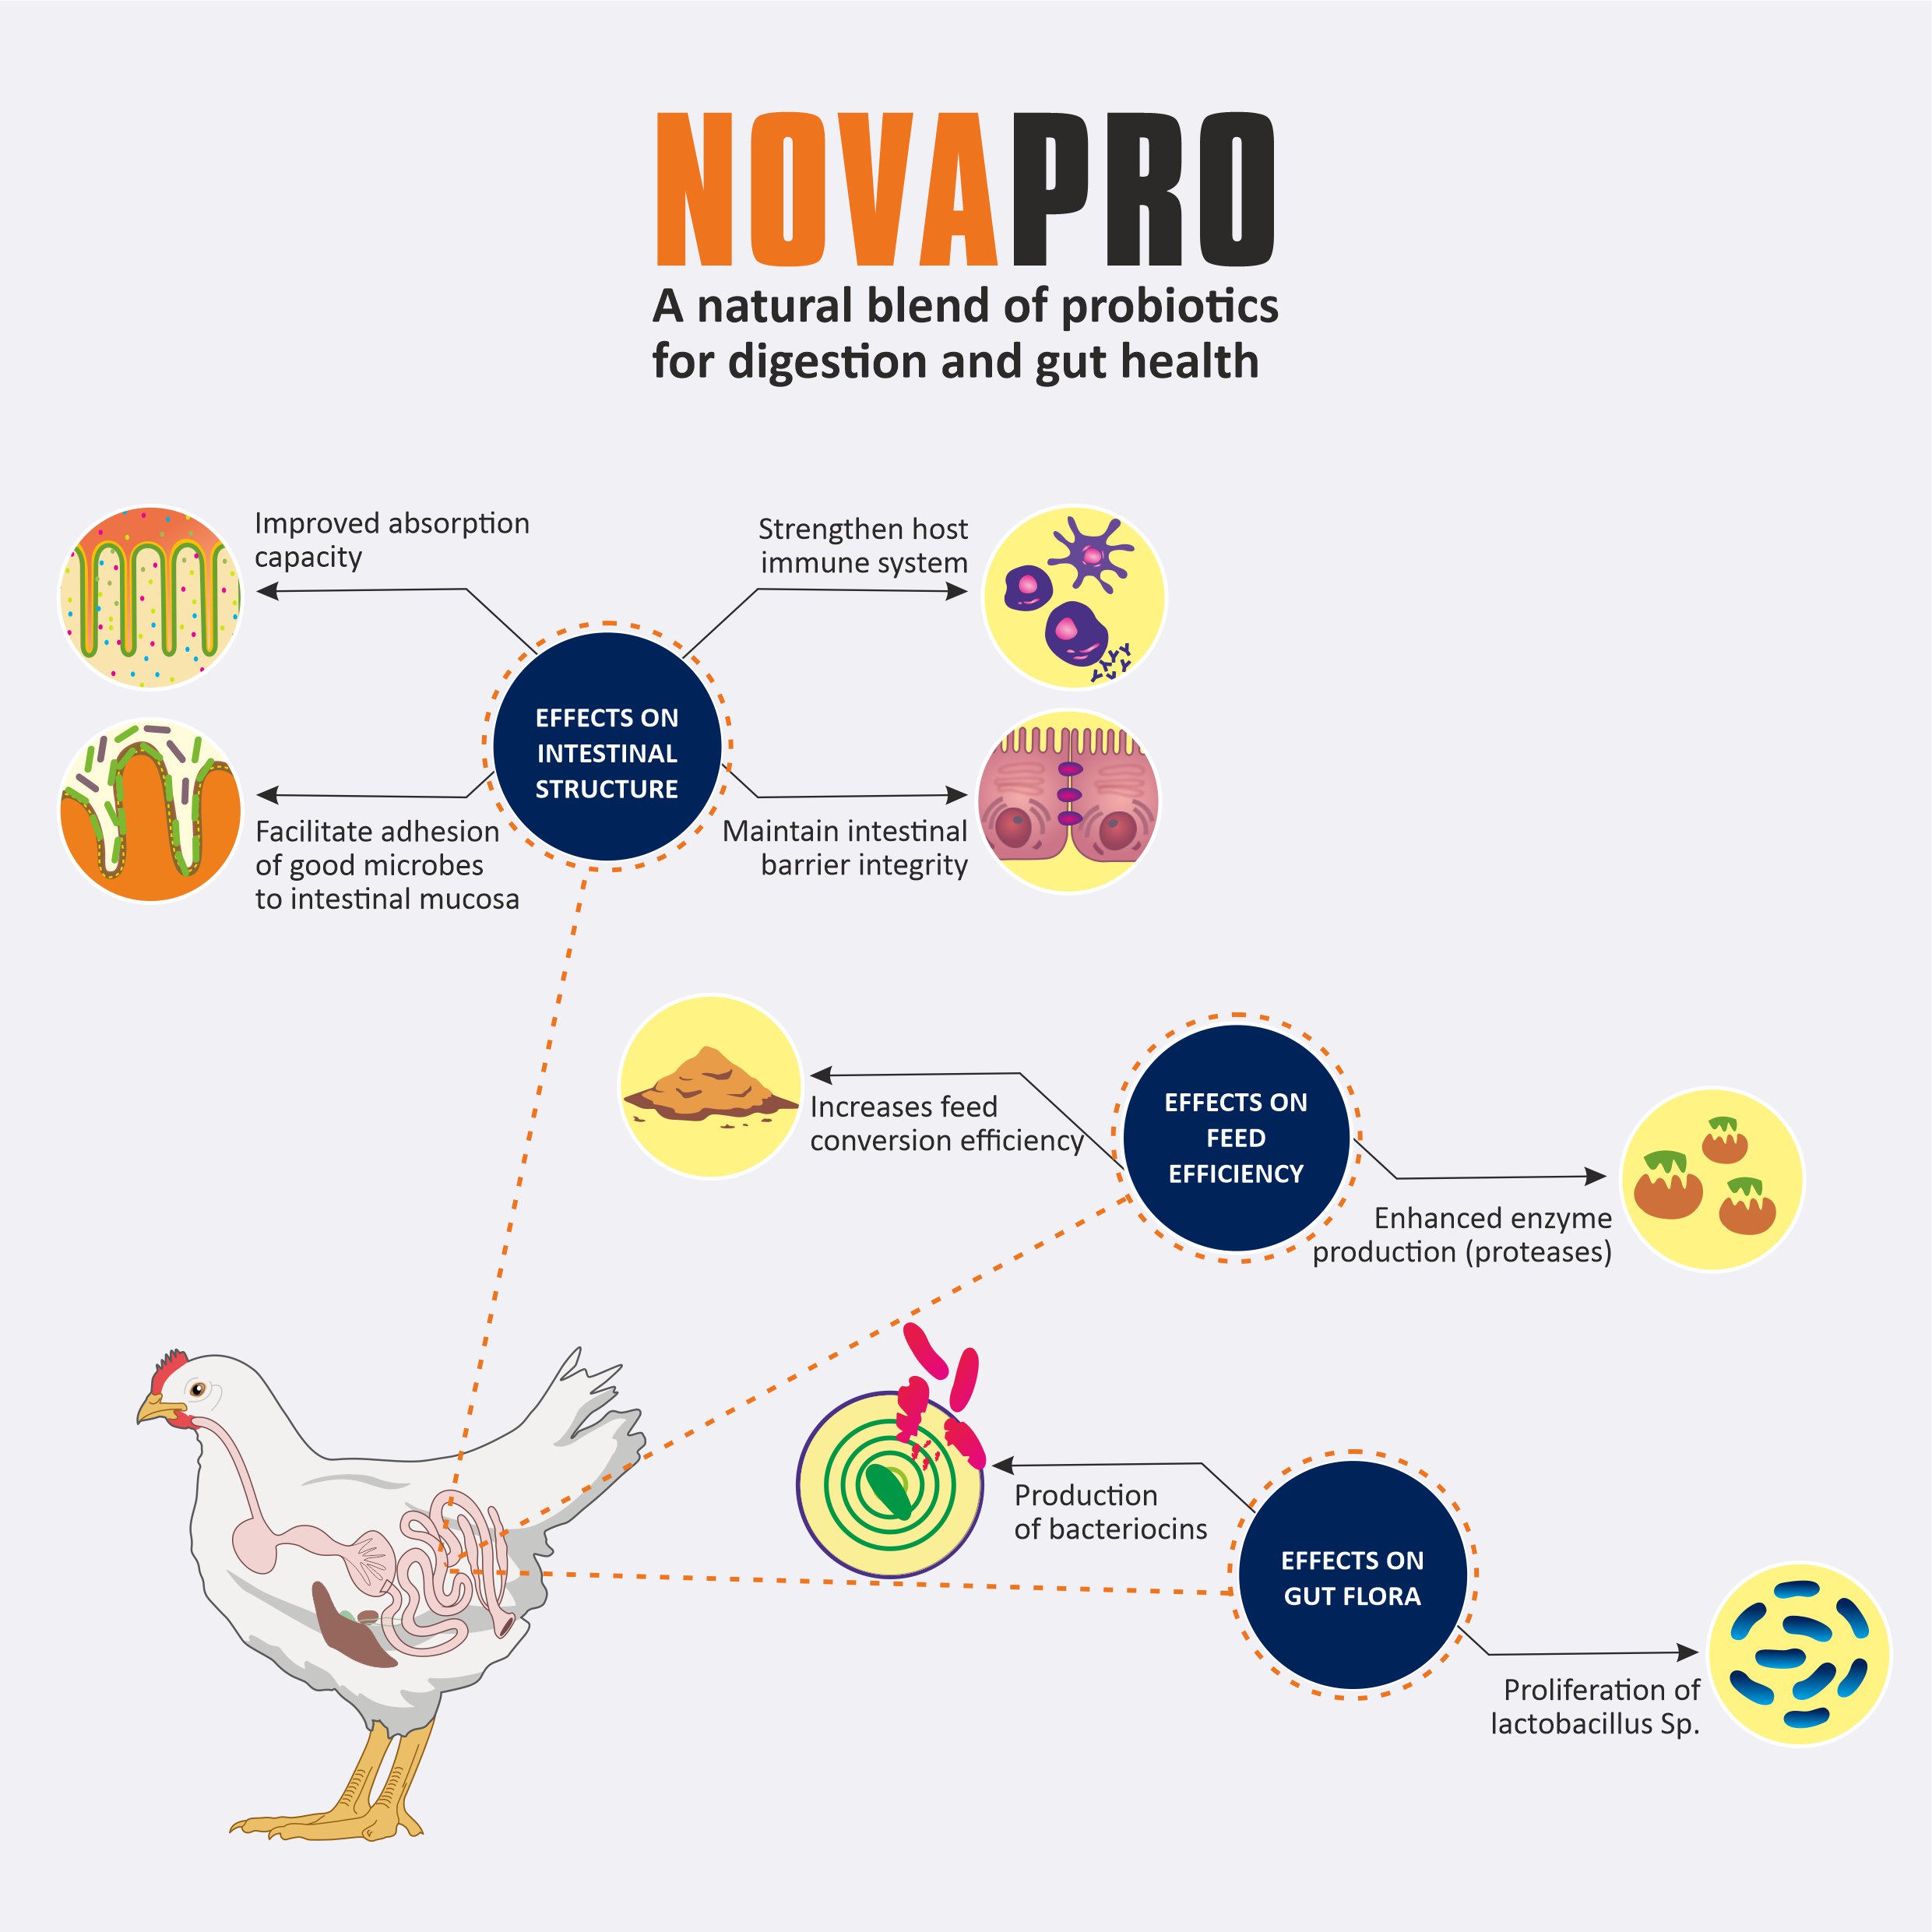 NOVAPRO MOA - Mechanism of action - Natural Supplements to Improve gut health and immune system in poultry